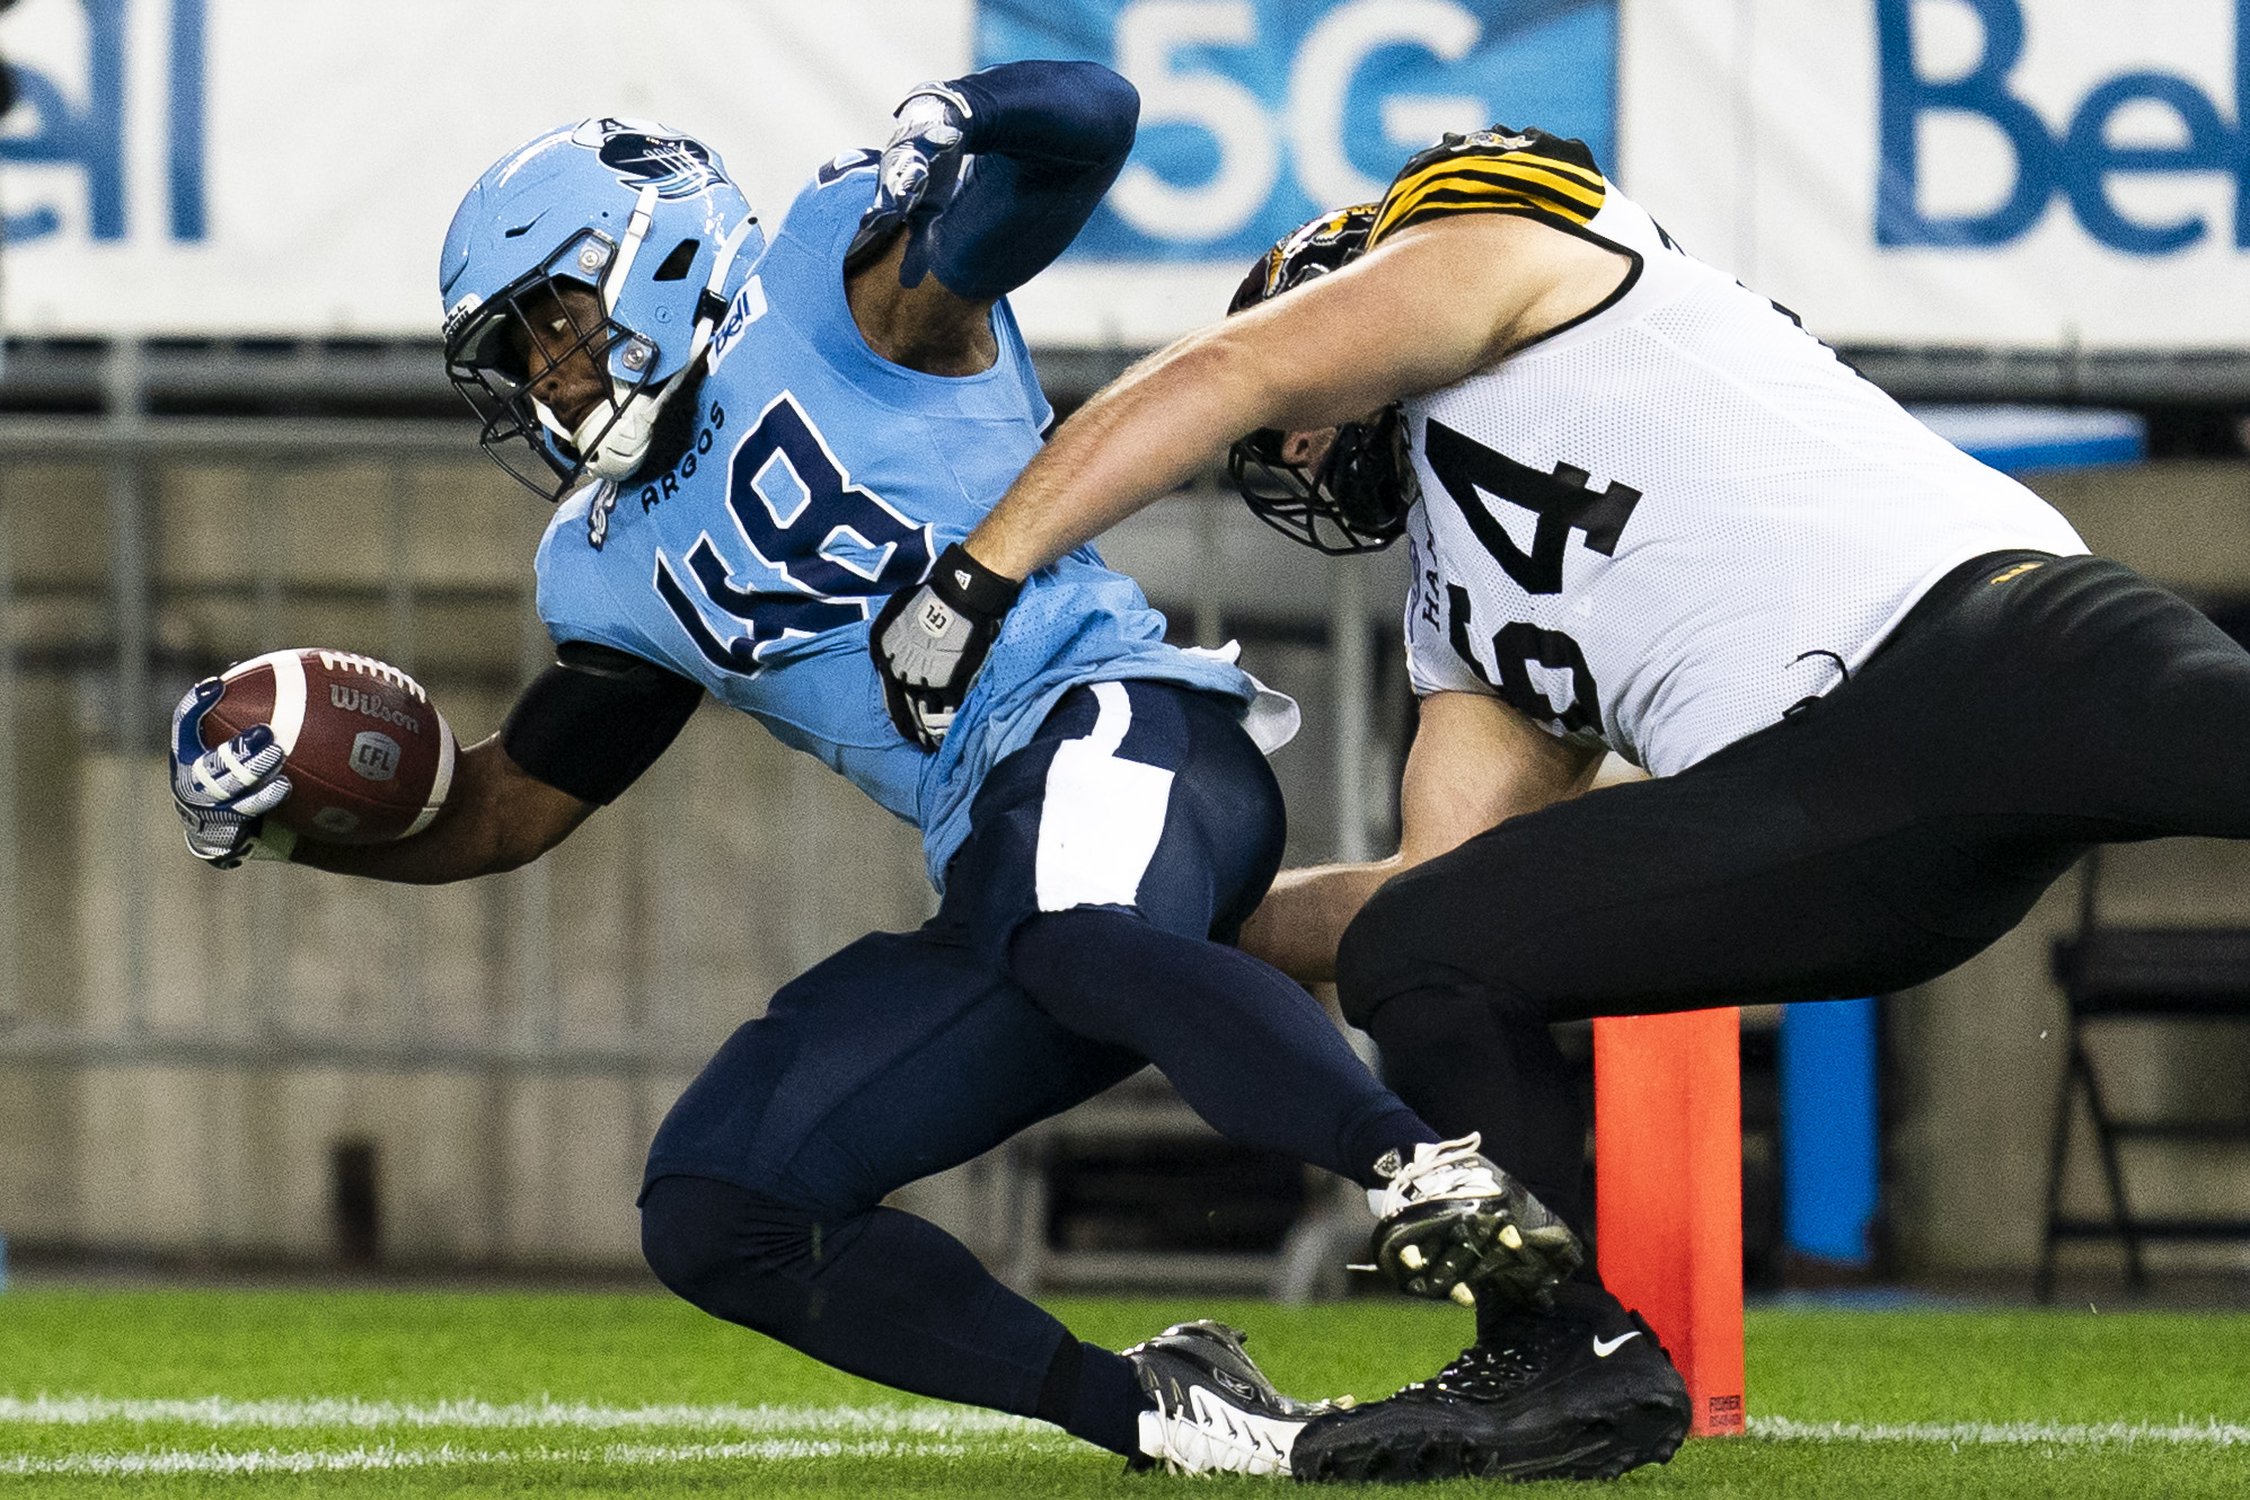  Toronto Argonauts linebacker Wynton McManis (48) makes a touchdown as Hamilton Tiger-Cats offensive linemen Coulter Woodmansey (64) attempts a tackle during first half CFL football action in Toronto, on Saturday, Sept. 23, 2023. THE CANADIAN PRESS/S